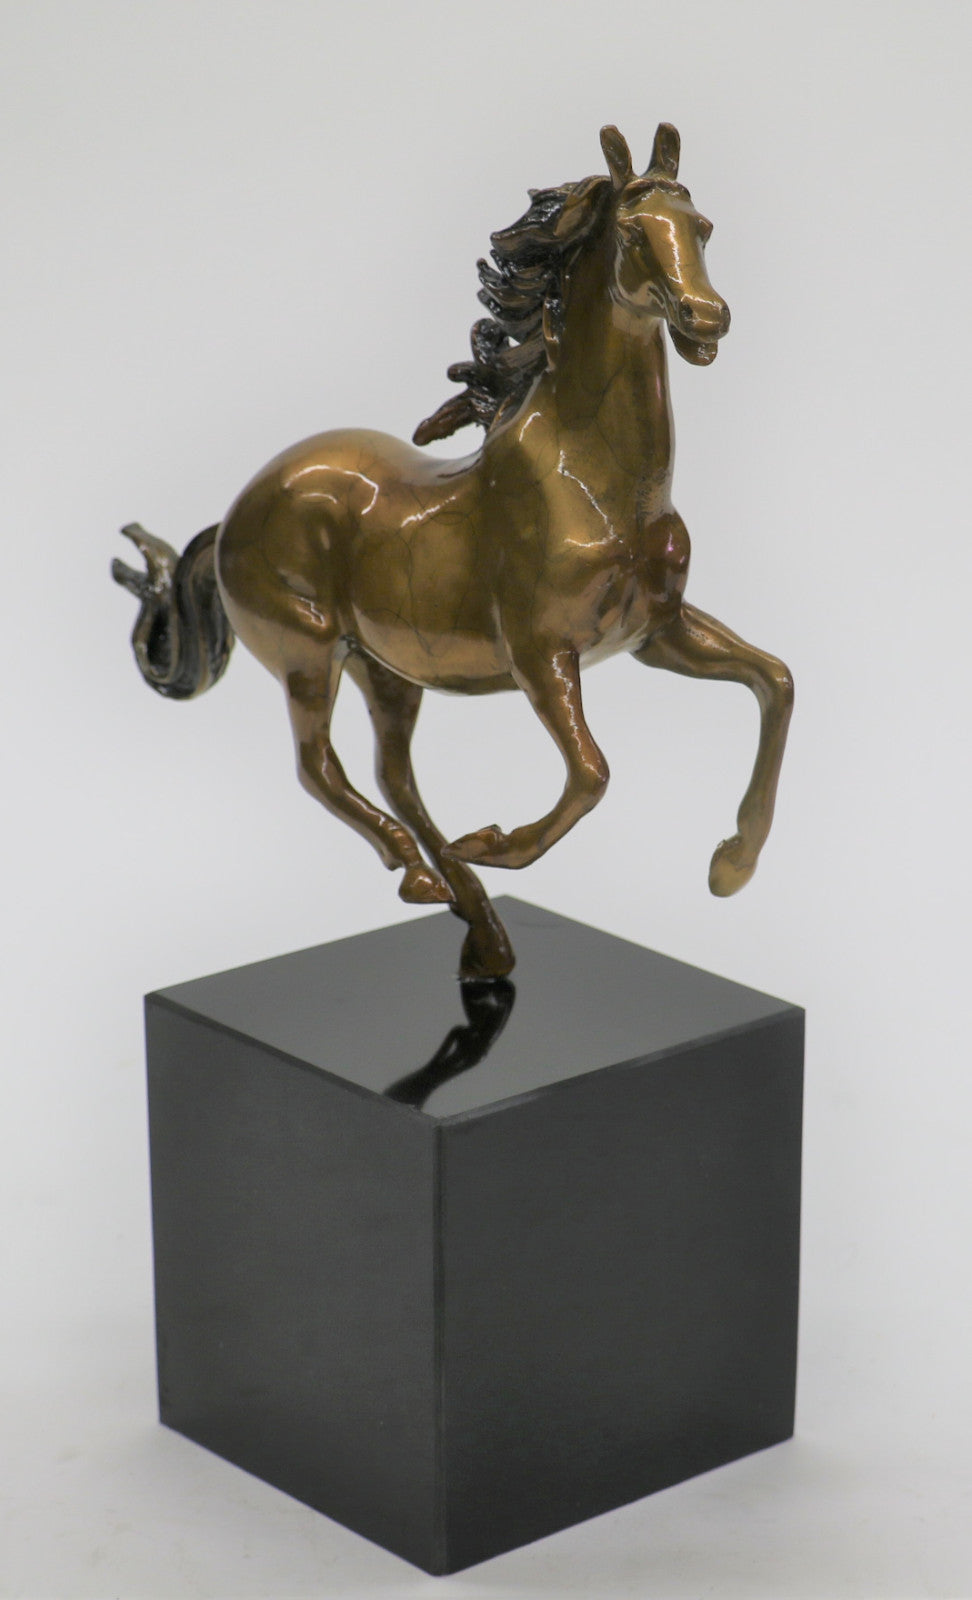 Signed Milo Running Horse Bronze Sculpture Limited Edition Statue Figurine Gift